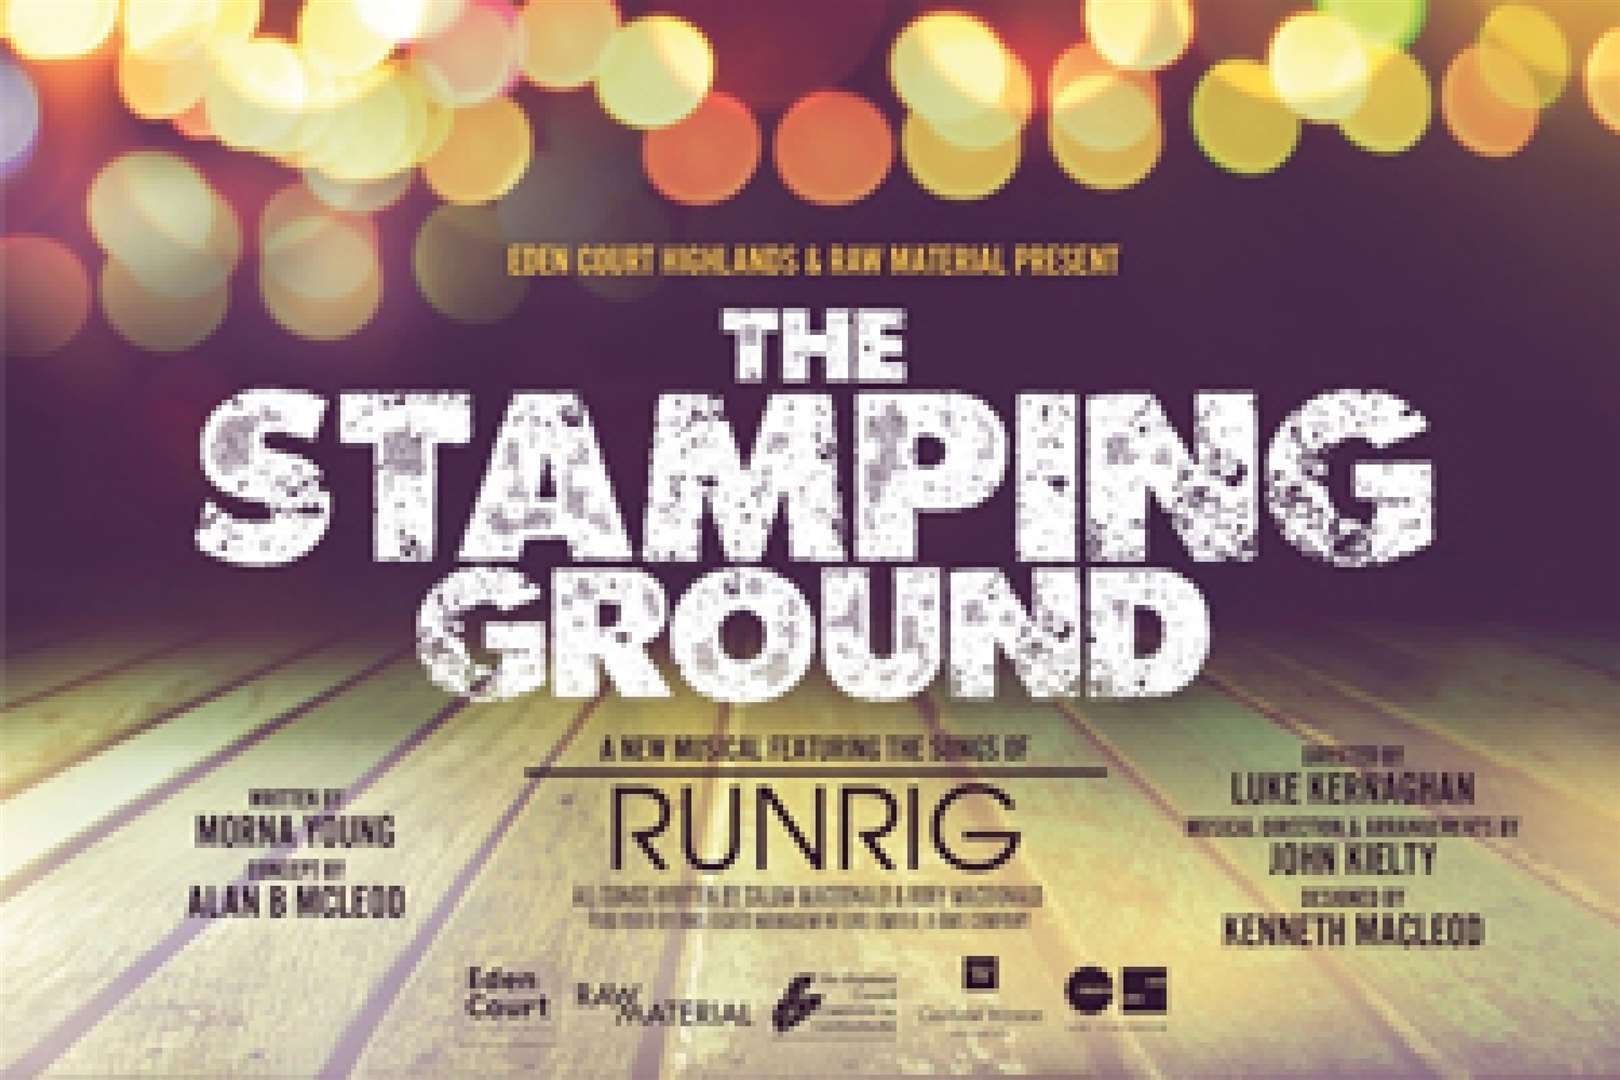 The Stamping Ground is at Eden Court until July 30.